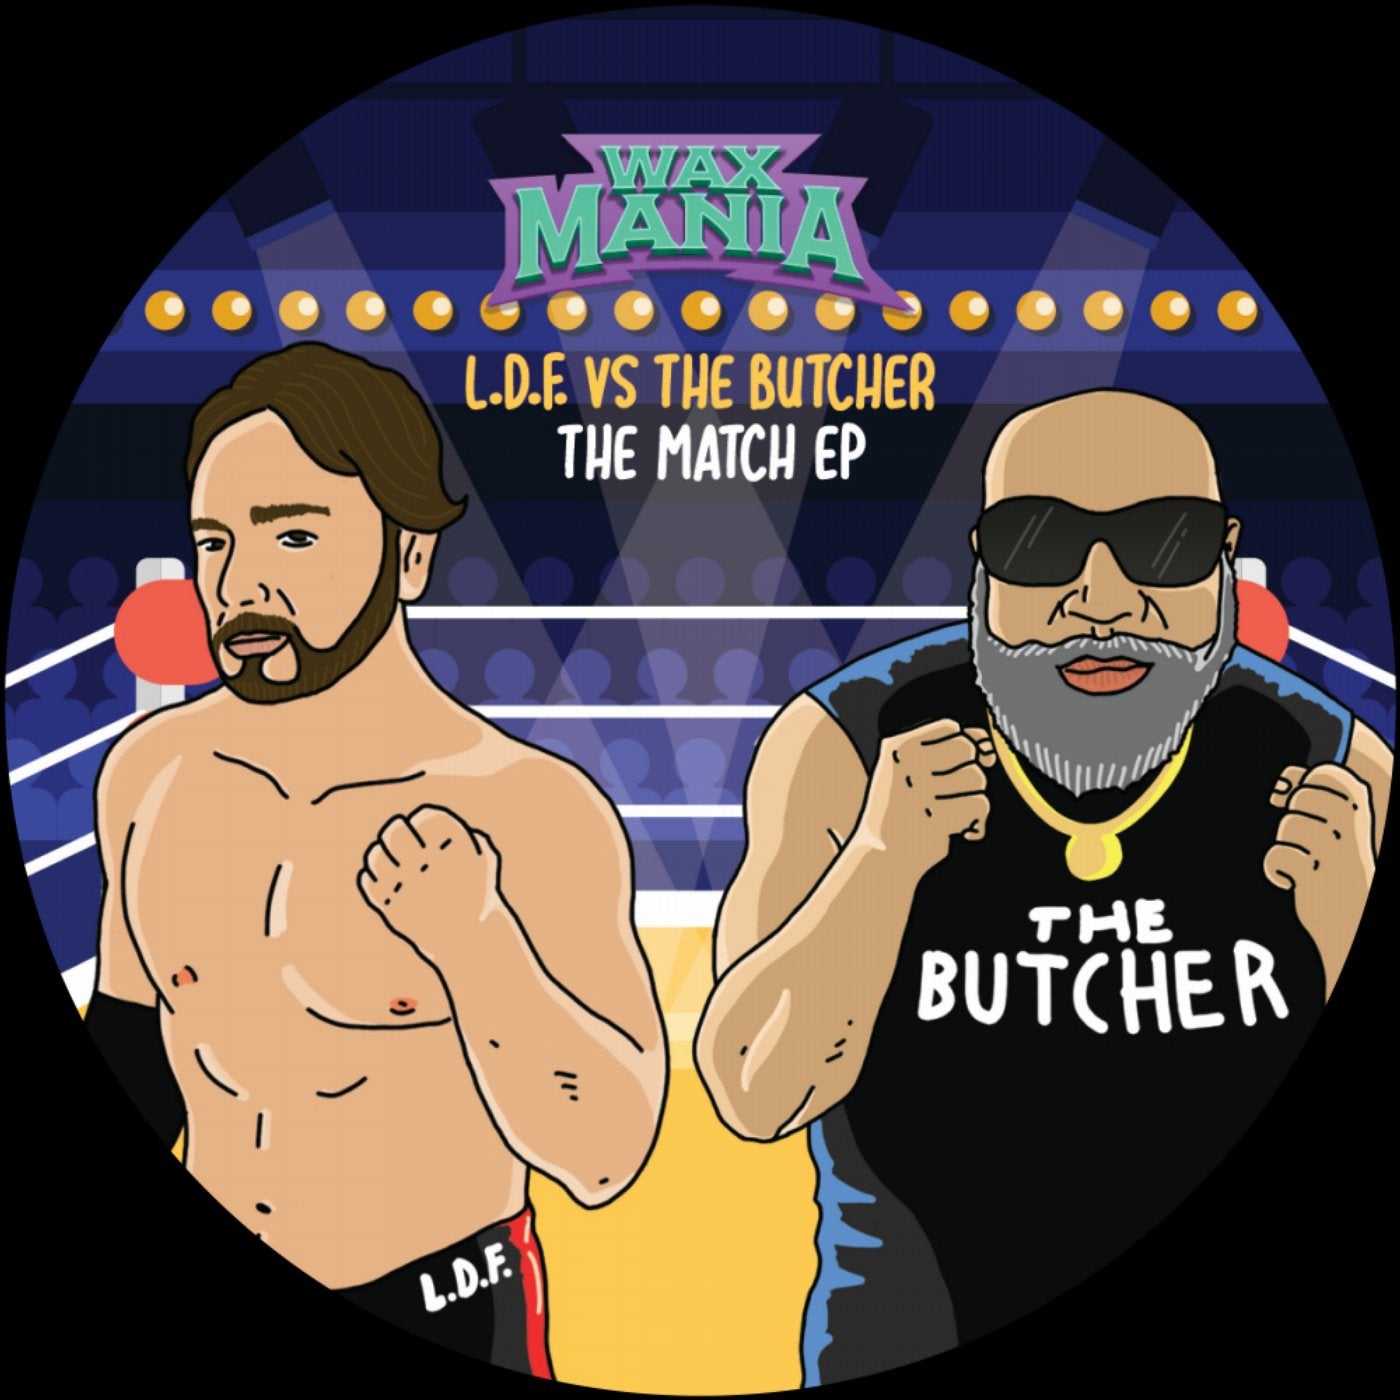 The Match Ep